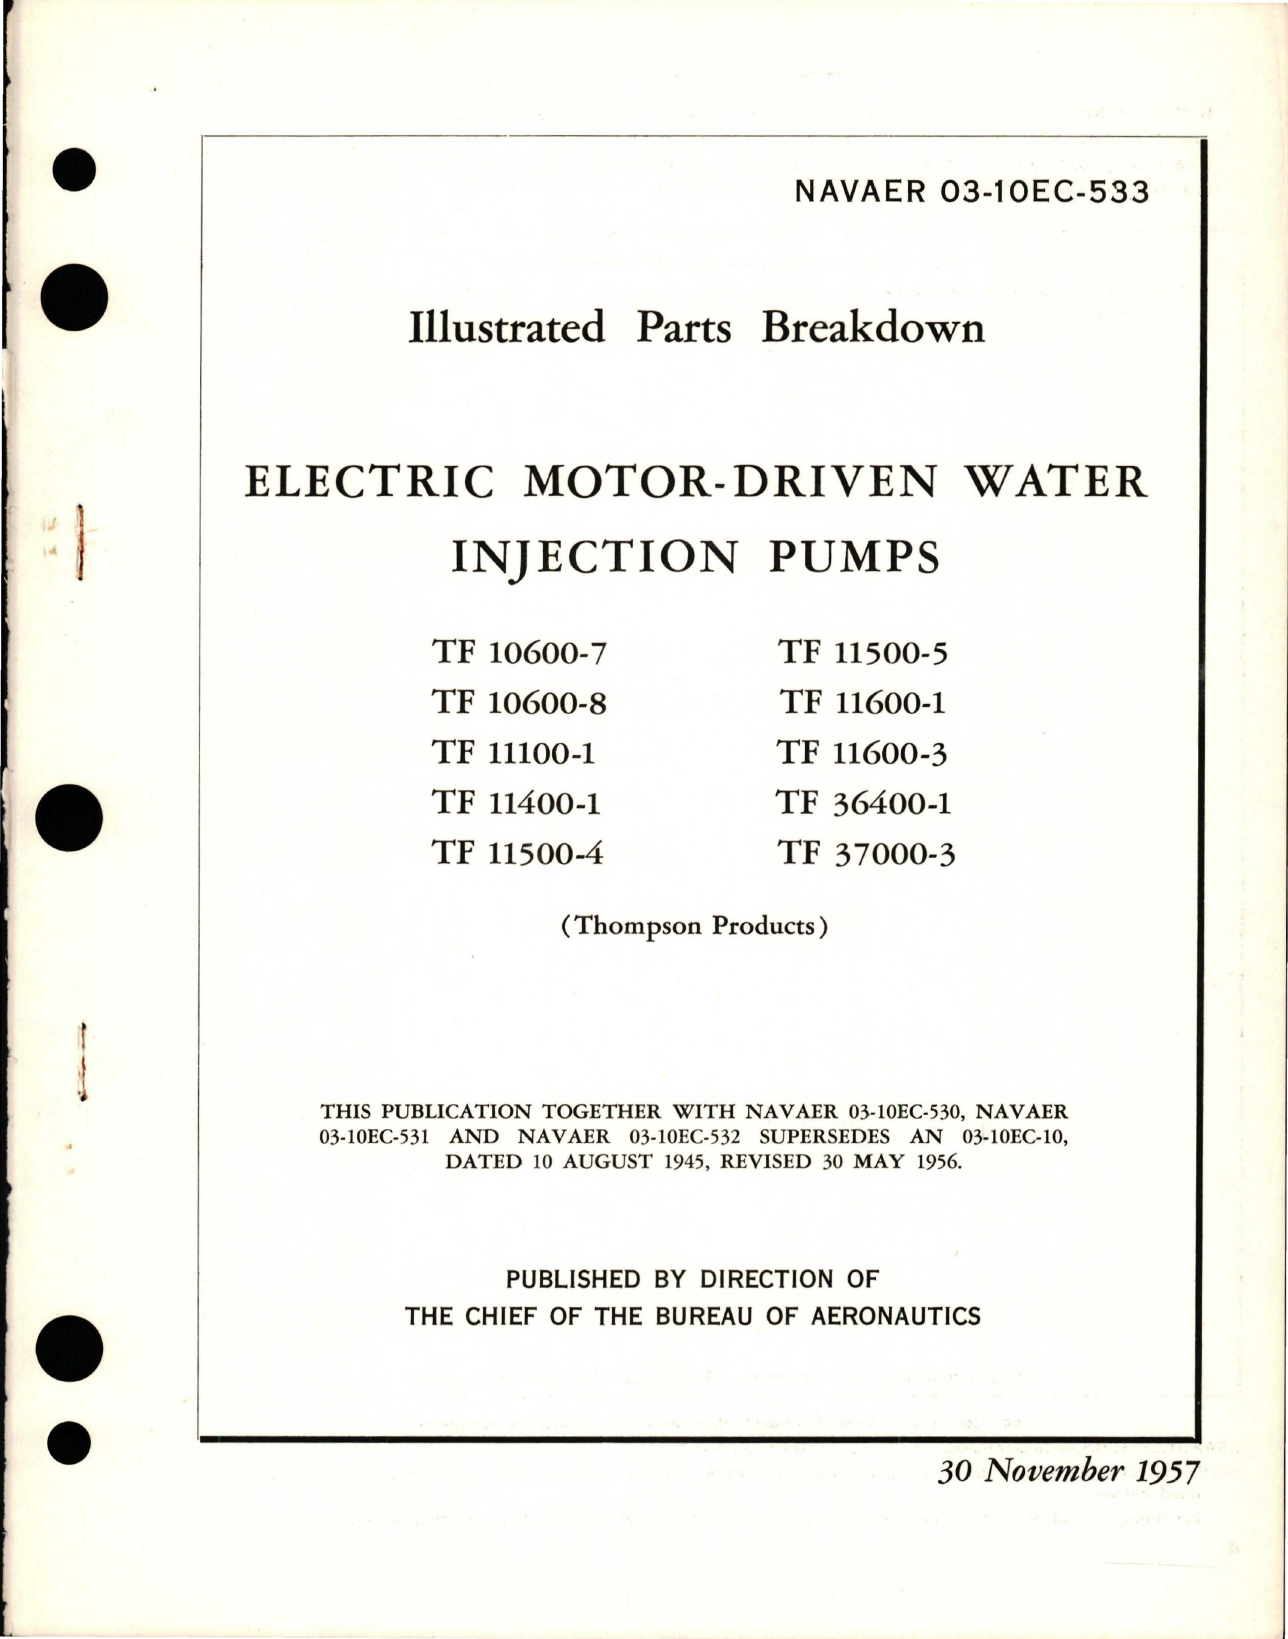 Sample page 1 from AirCorps Library document: Illustrated Parts Breakdown for Electric Motor Driven Water Injection Pumps